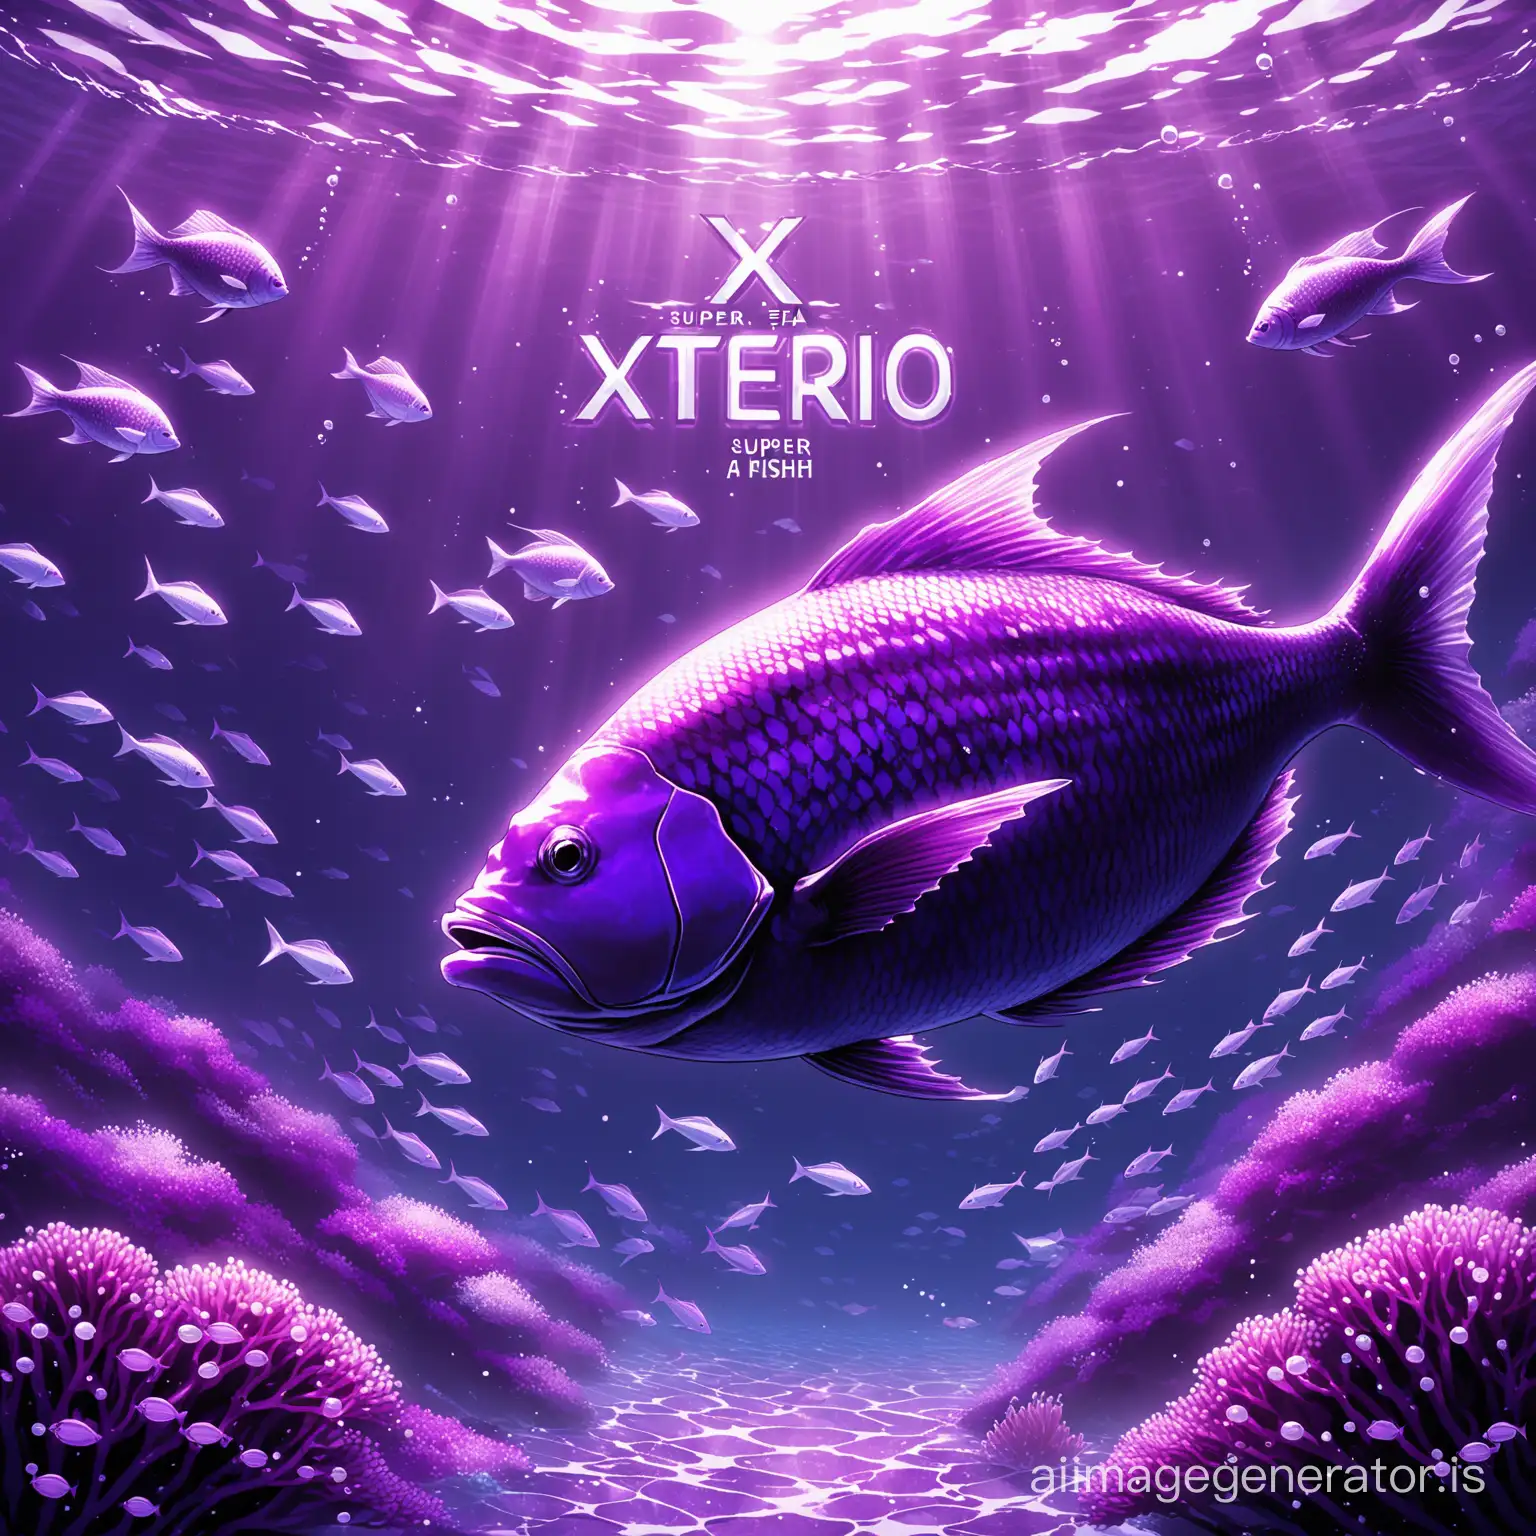 Detailed-Purple-Fish-in-Vibrant-Purple-Sea-with-Xterio-Text-in-Background